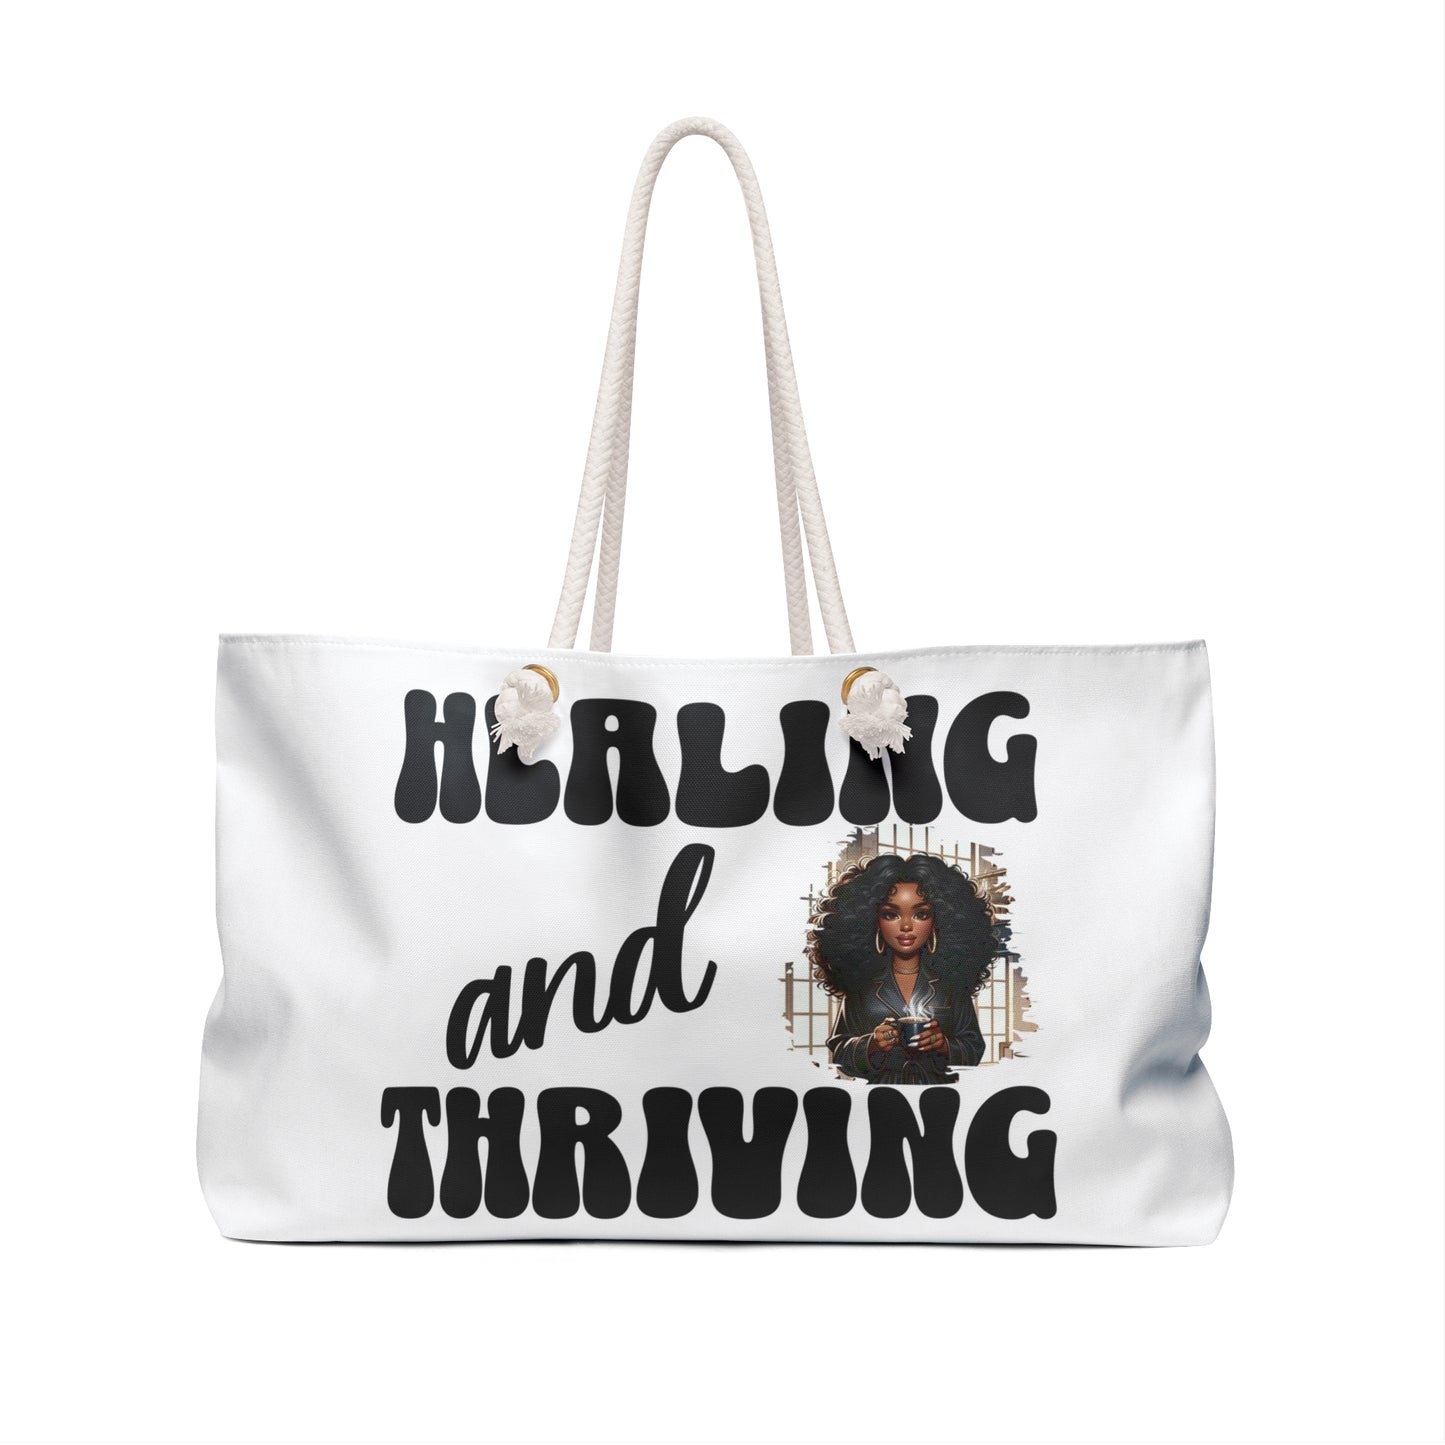 Healing & Thriving; Oversized Weekender Tote (Black and White)